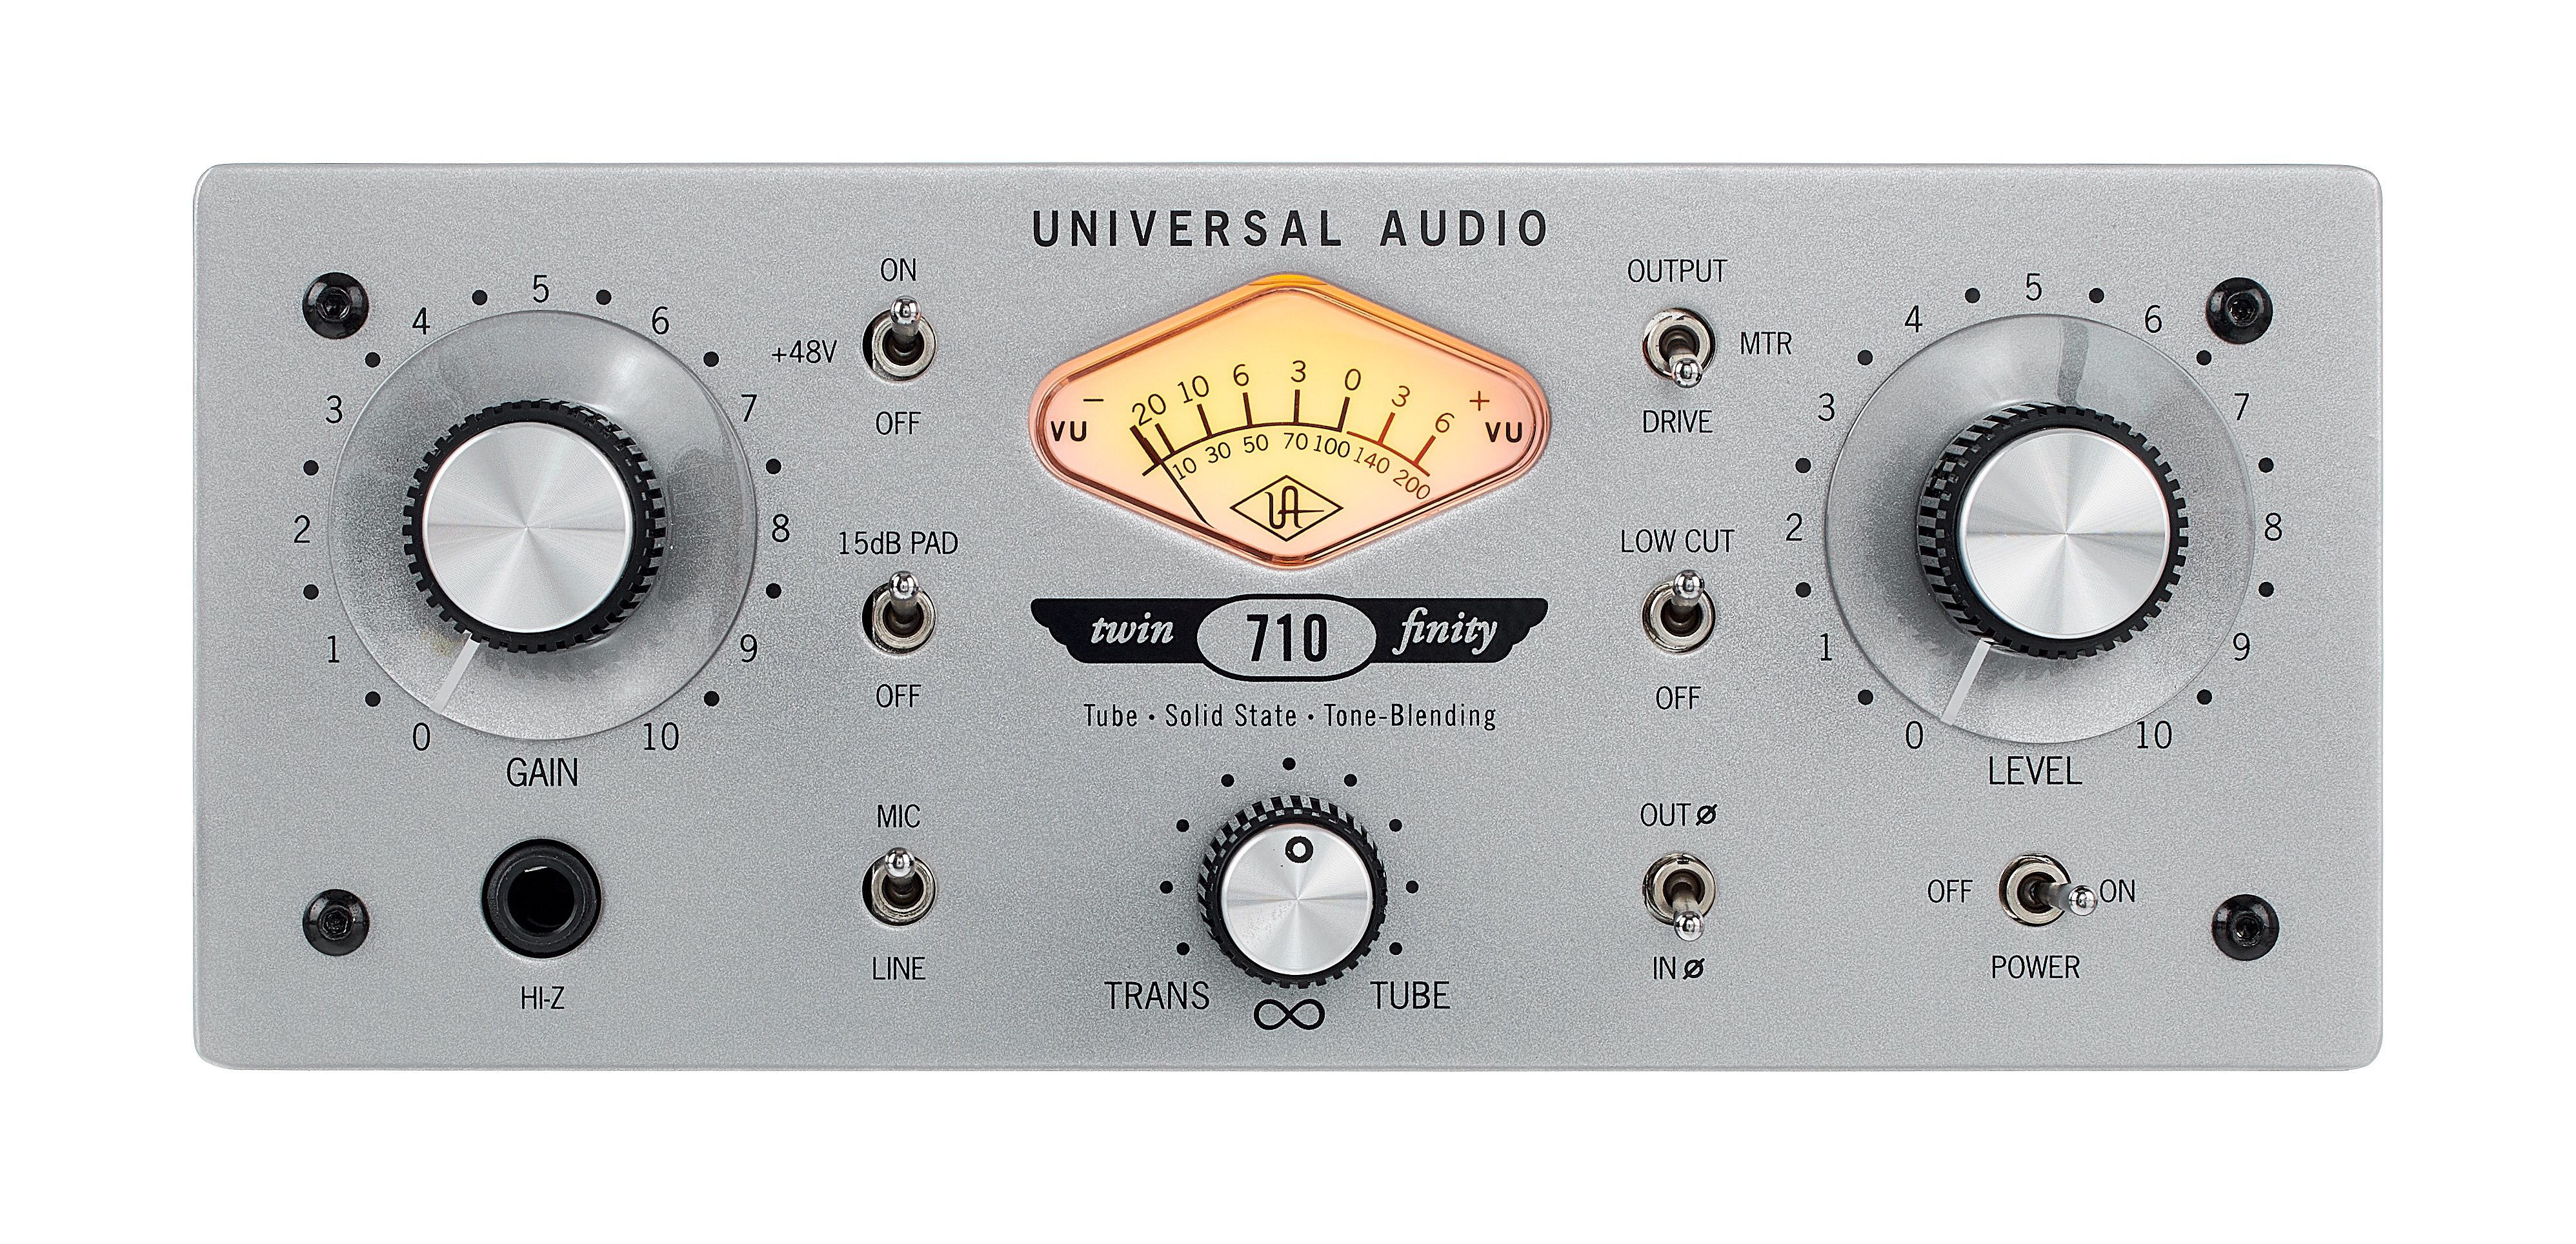 universal audio 710 twin finity test des Preamps